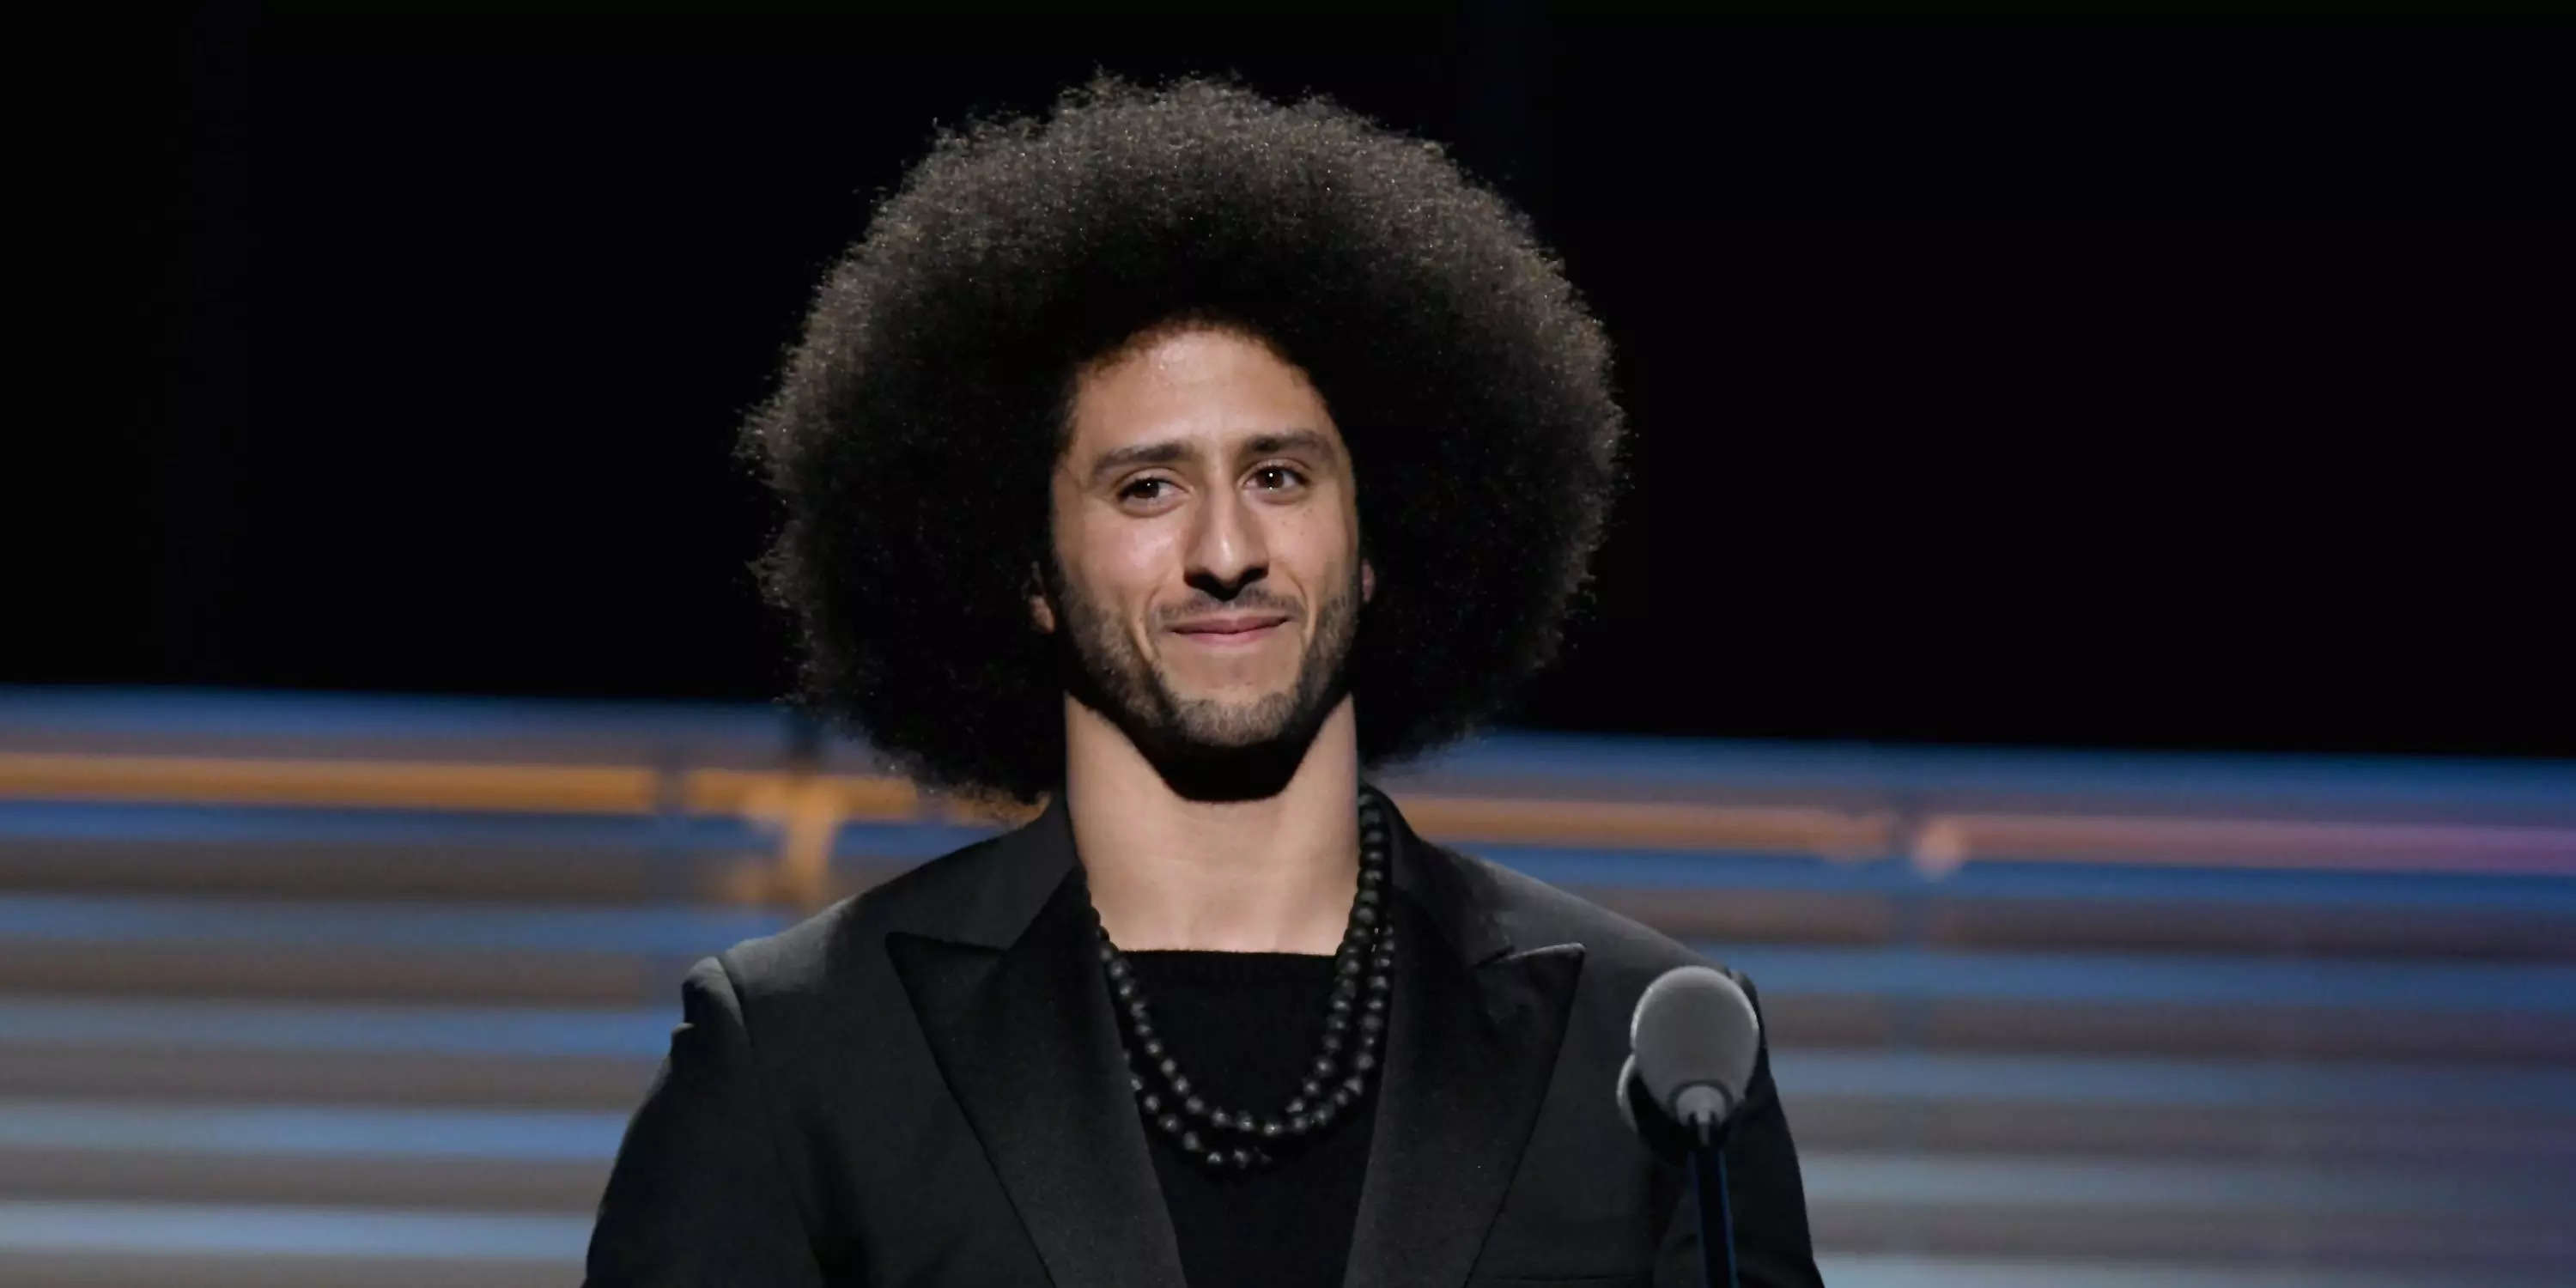 
A deal for Colin Kaepernick's SPAC unraveled because the former NFL star wouldn't do TV press for it, report says
